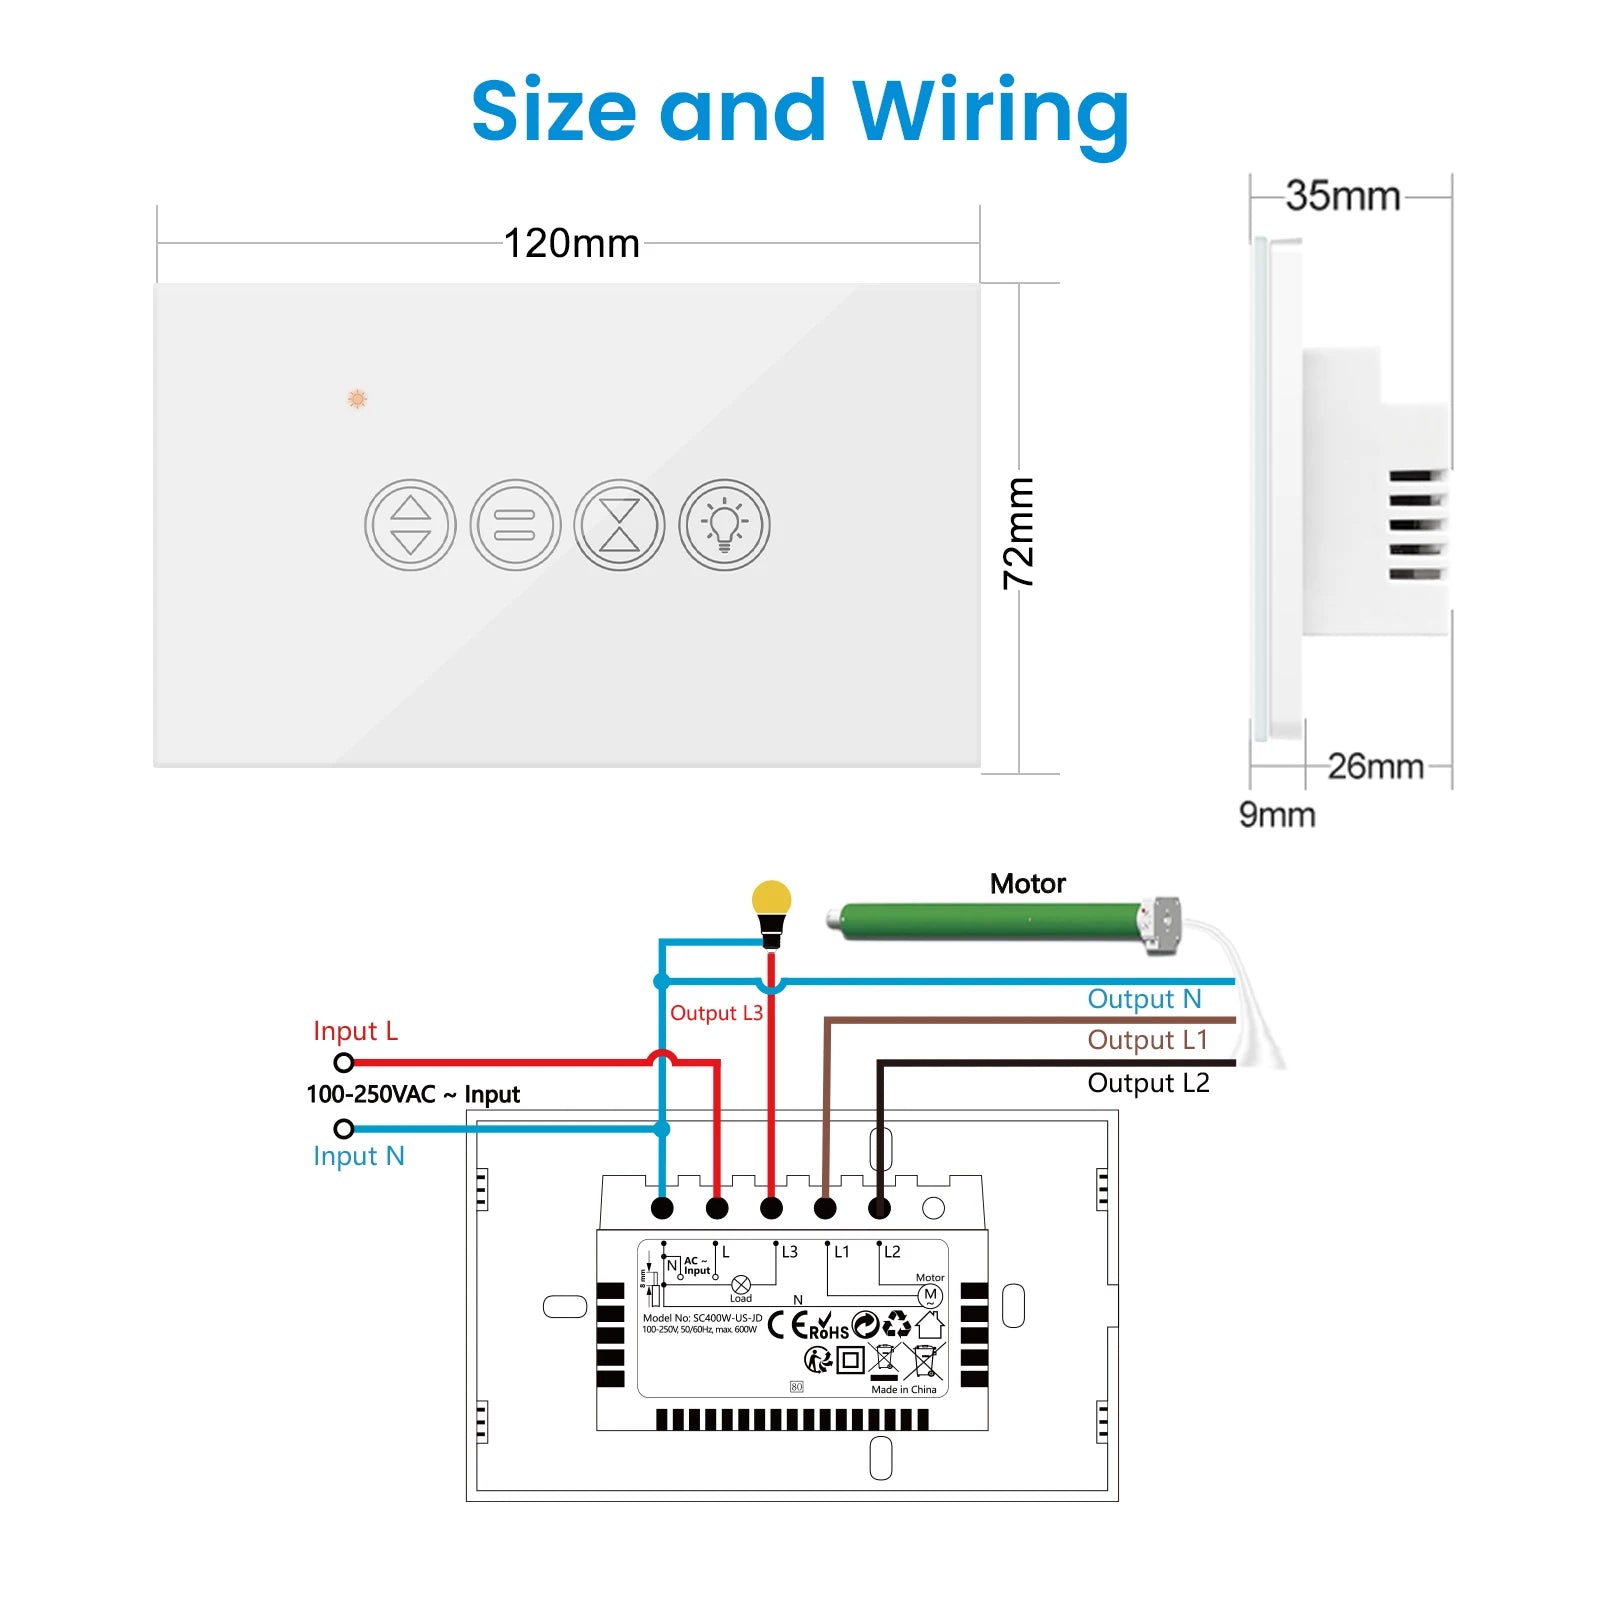 Switches Roller Shutter, Supports ZigBee, maxload 600W, With light switch